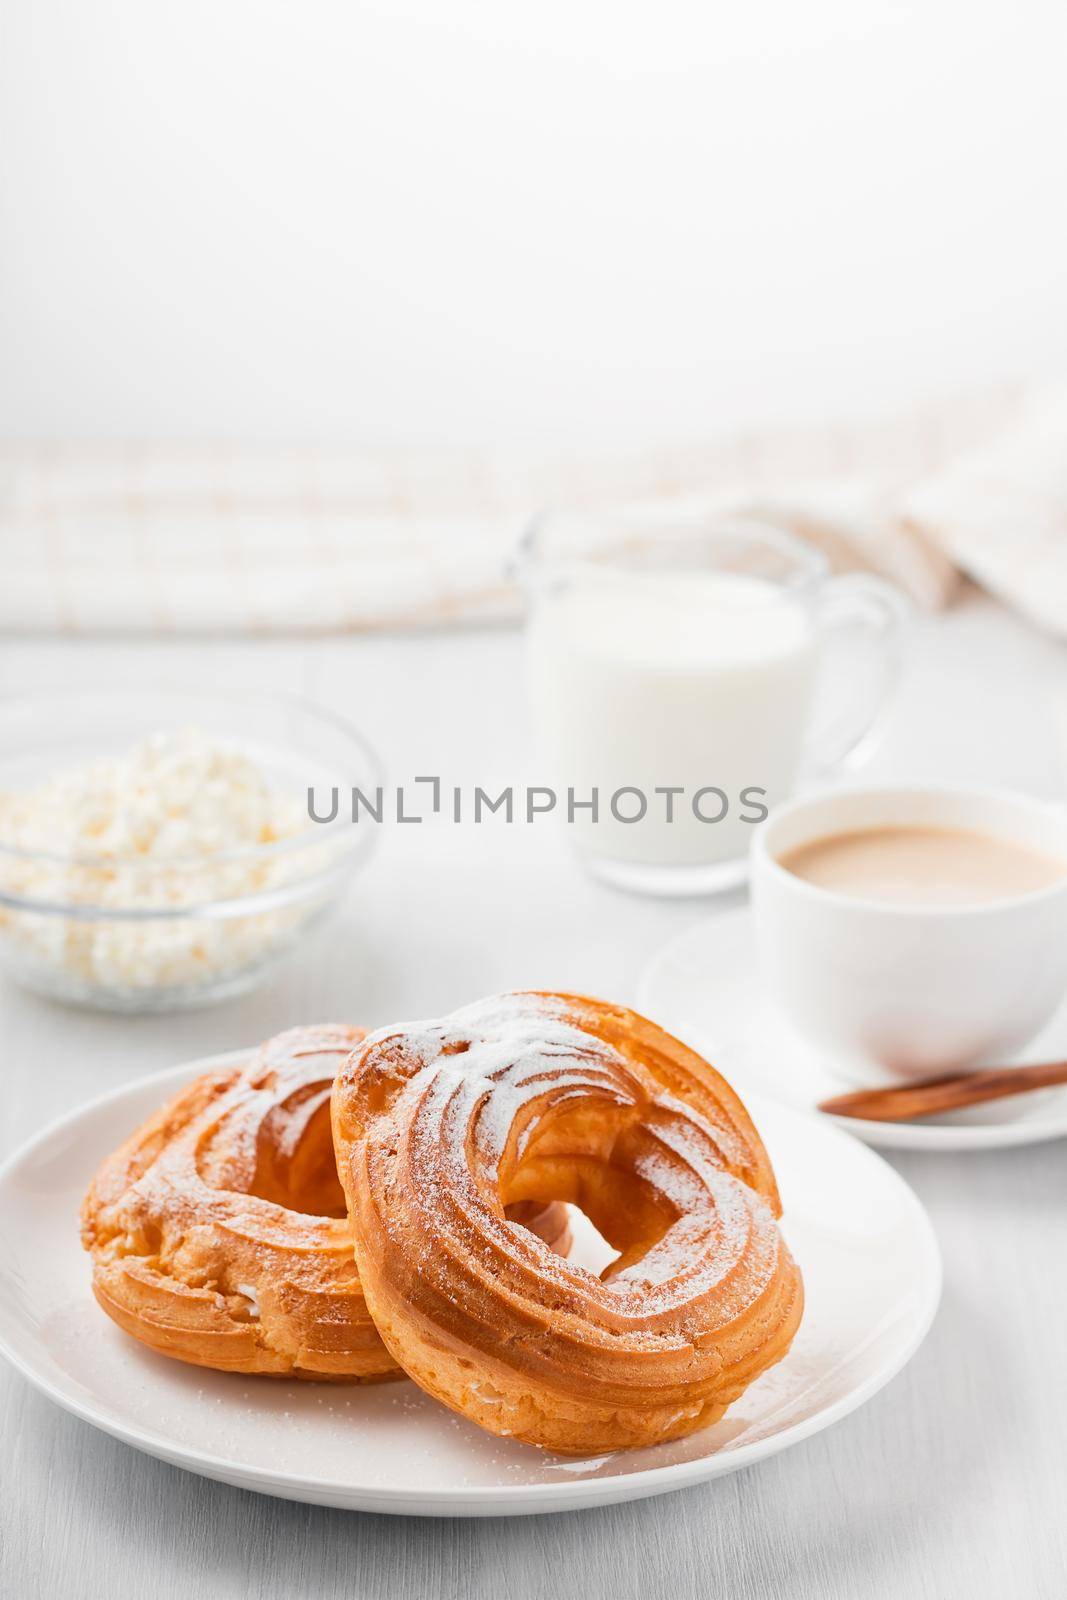 Morning coffee with cake. Custard rings, coffee, cream, cottage cheese on a white wooden table. Vertical image.